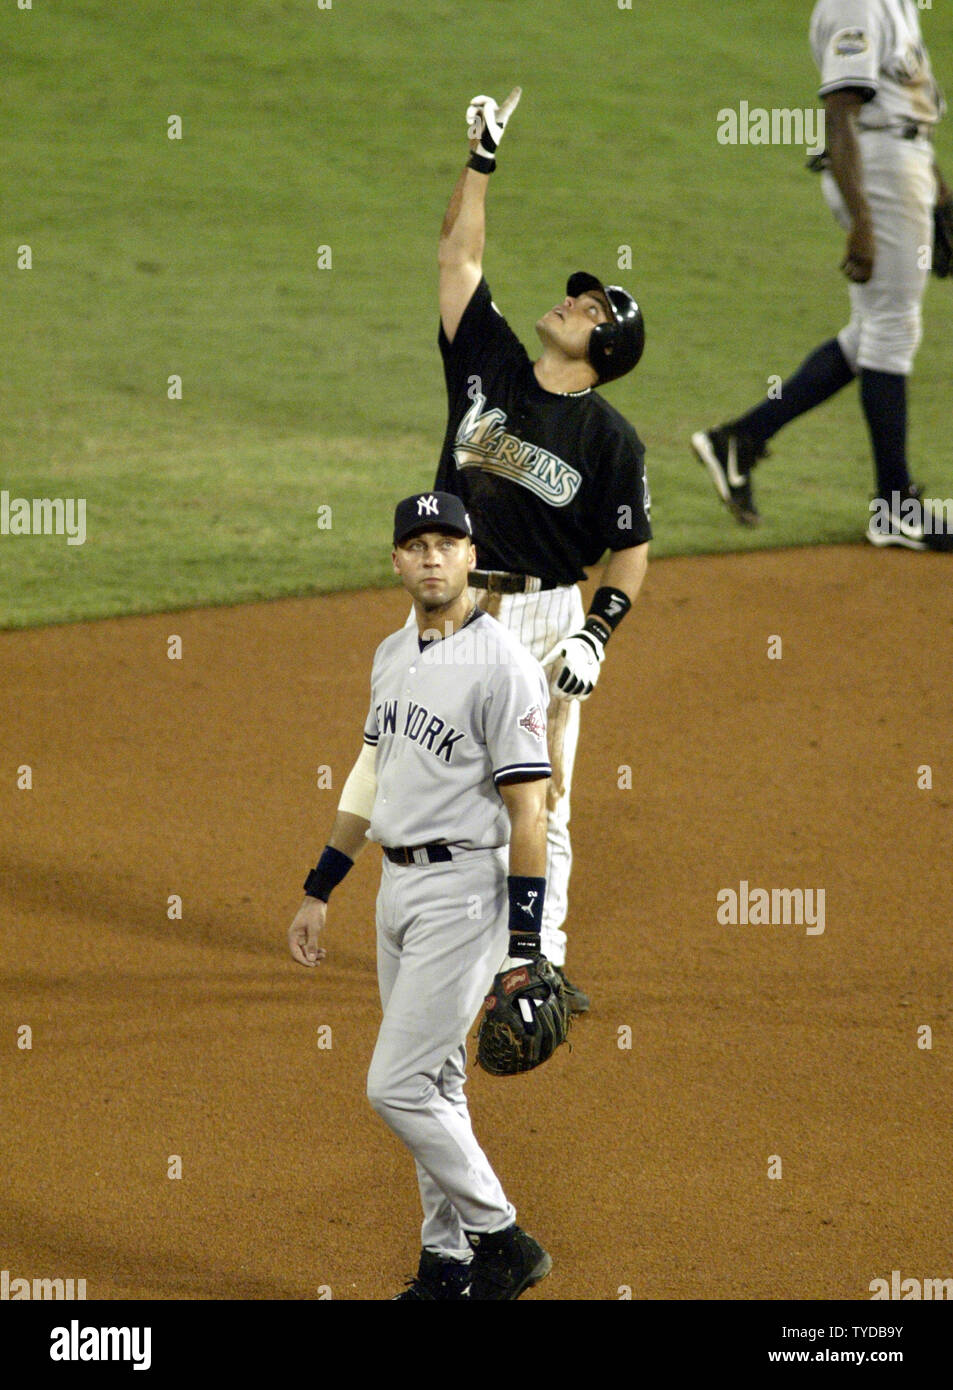 Florida Marlins catcher Ivan Pudge Rodriguez points to the sky, Yankees  Derek Jeter in foreground, after hitting a double against the New York  Yankees in game 4 of the 2003 MLB World